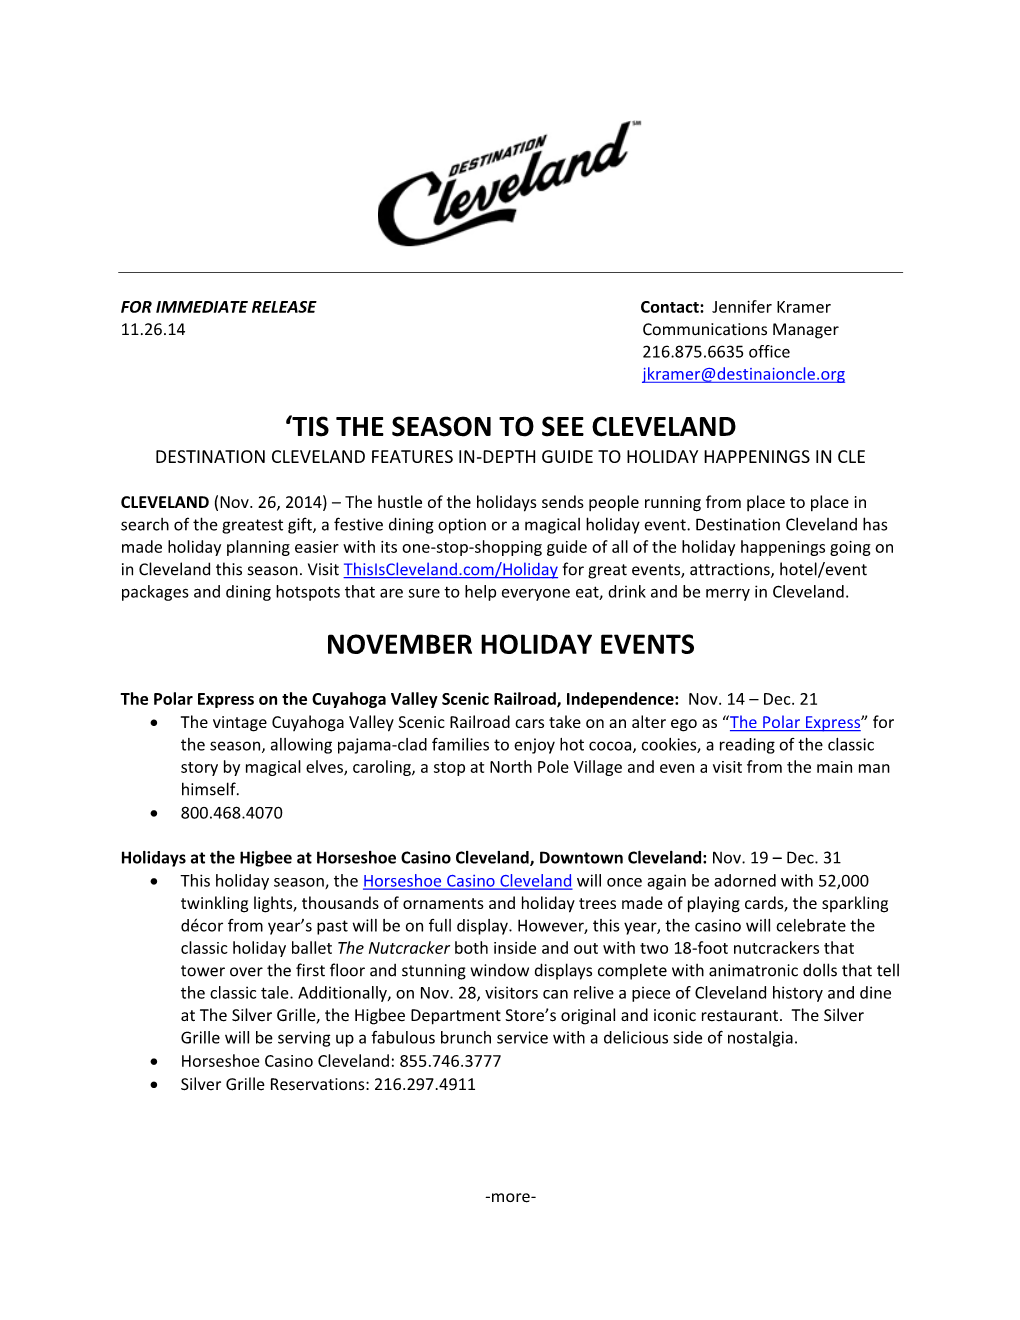 Tis the Season to See Cleveland Destination Cleveland Features In-Depth Guide to Holiday Happenings in Cle